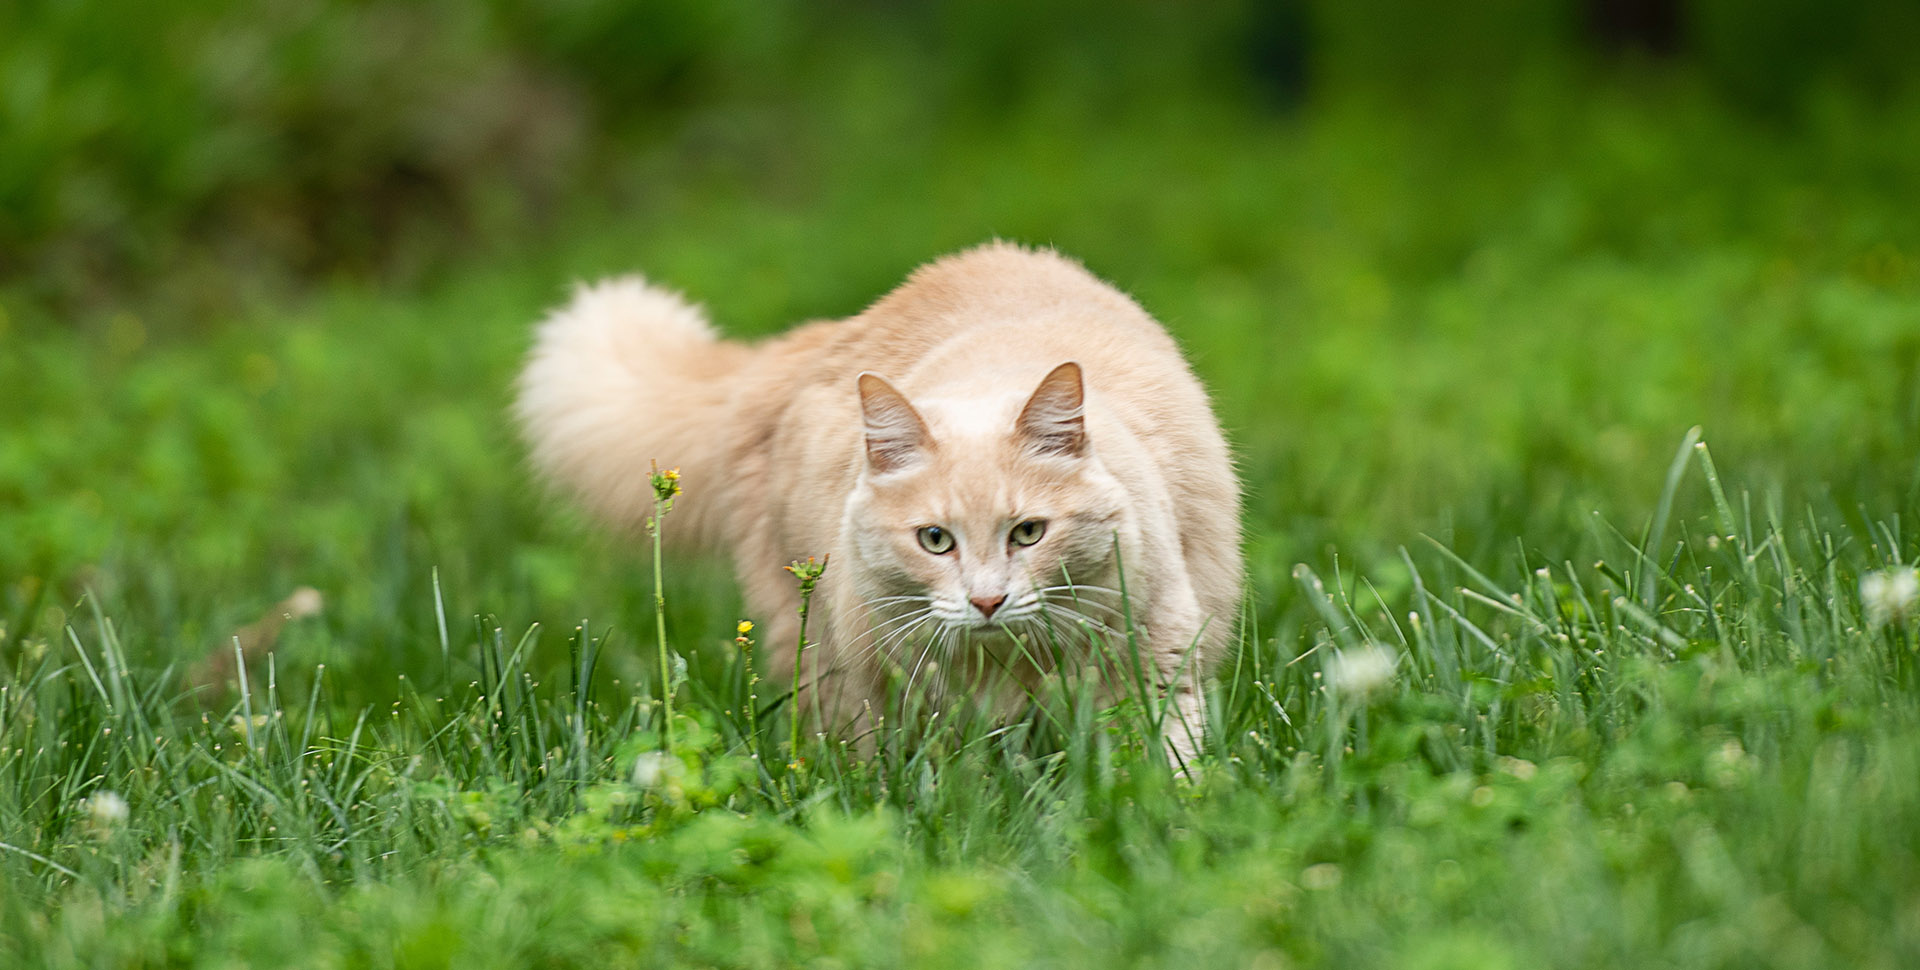 Catswort, valerian and “cat grass” for the well-being and health of your cat